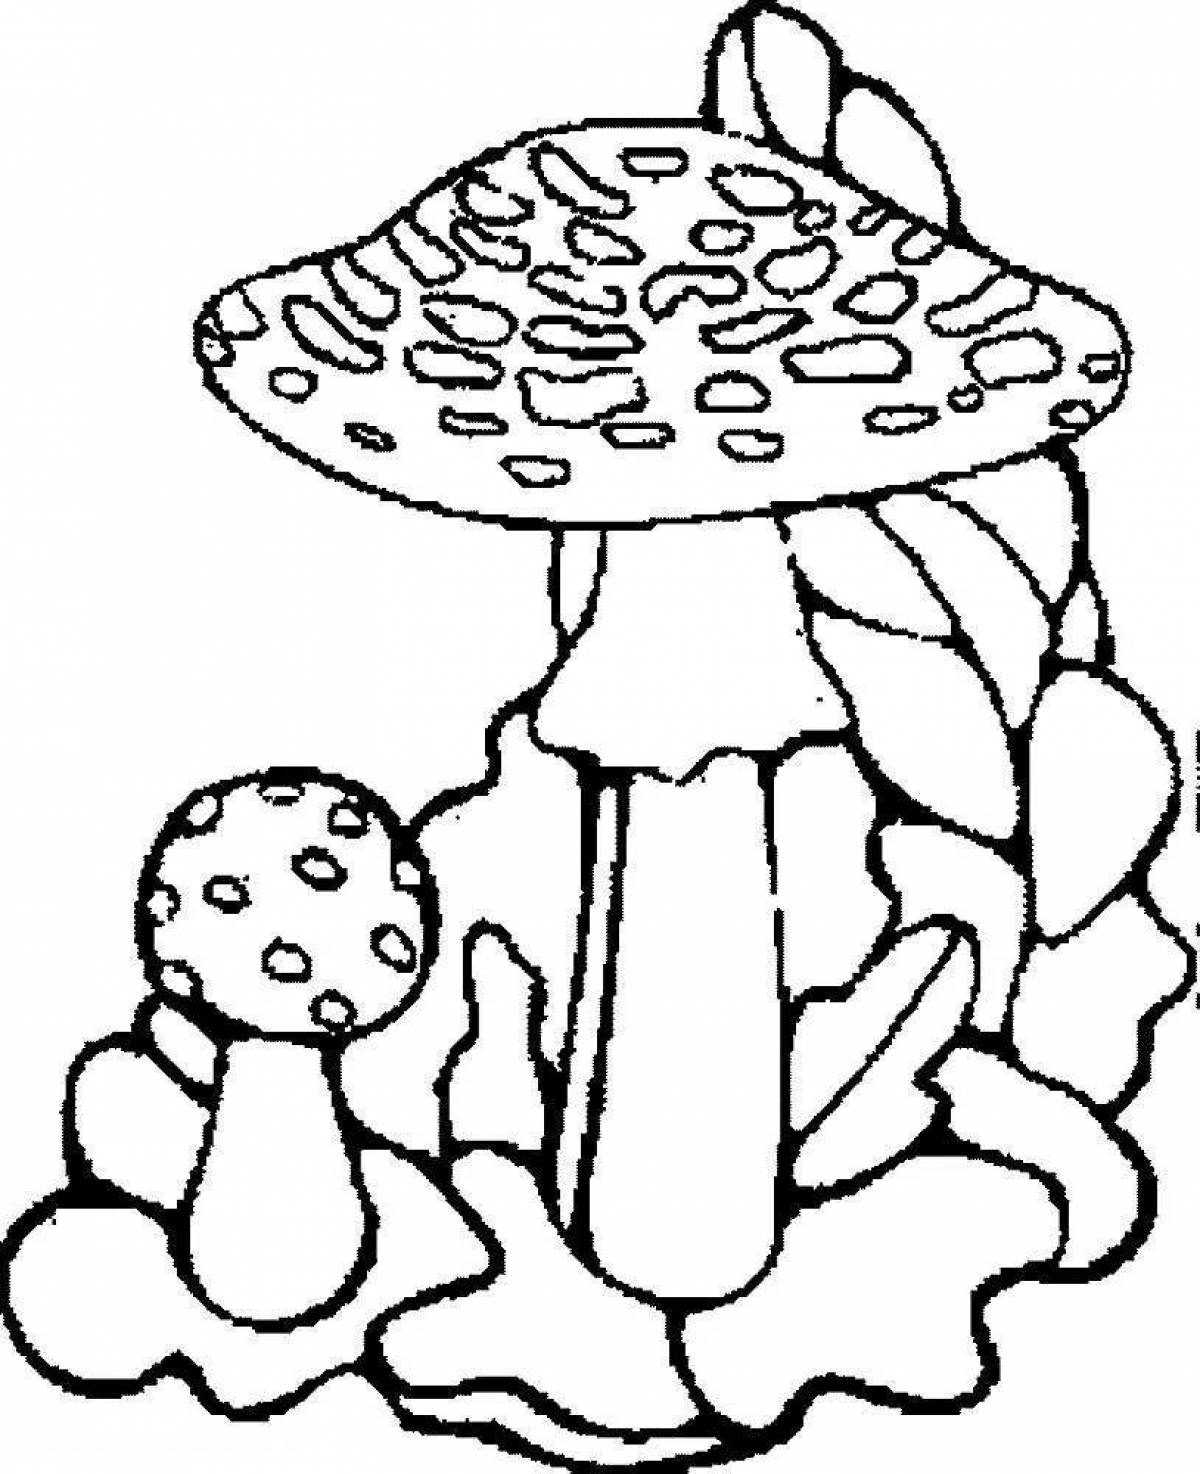 Coloring book shiny fly agaric